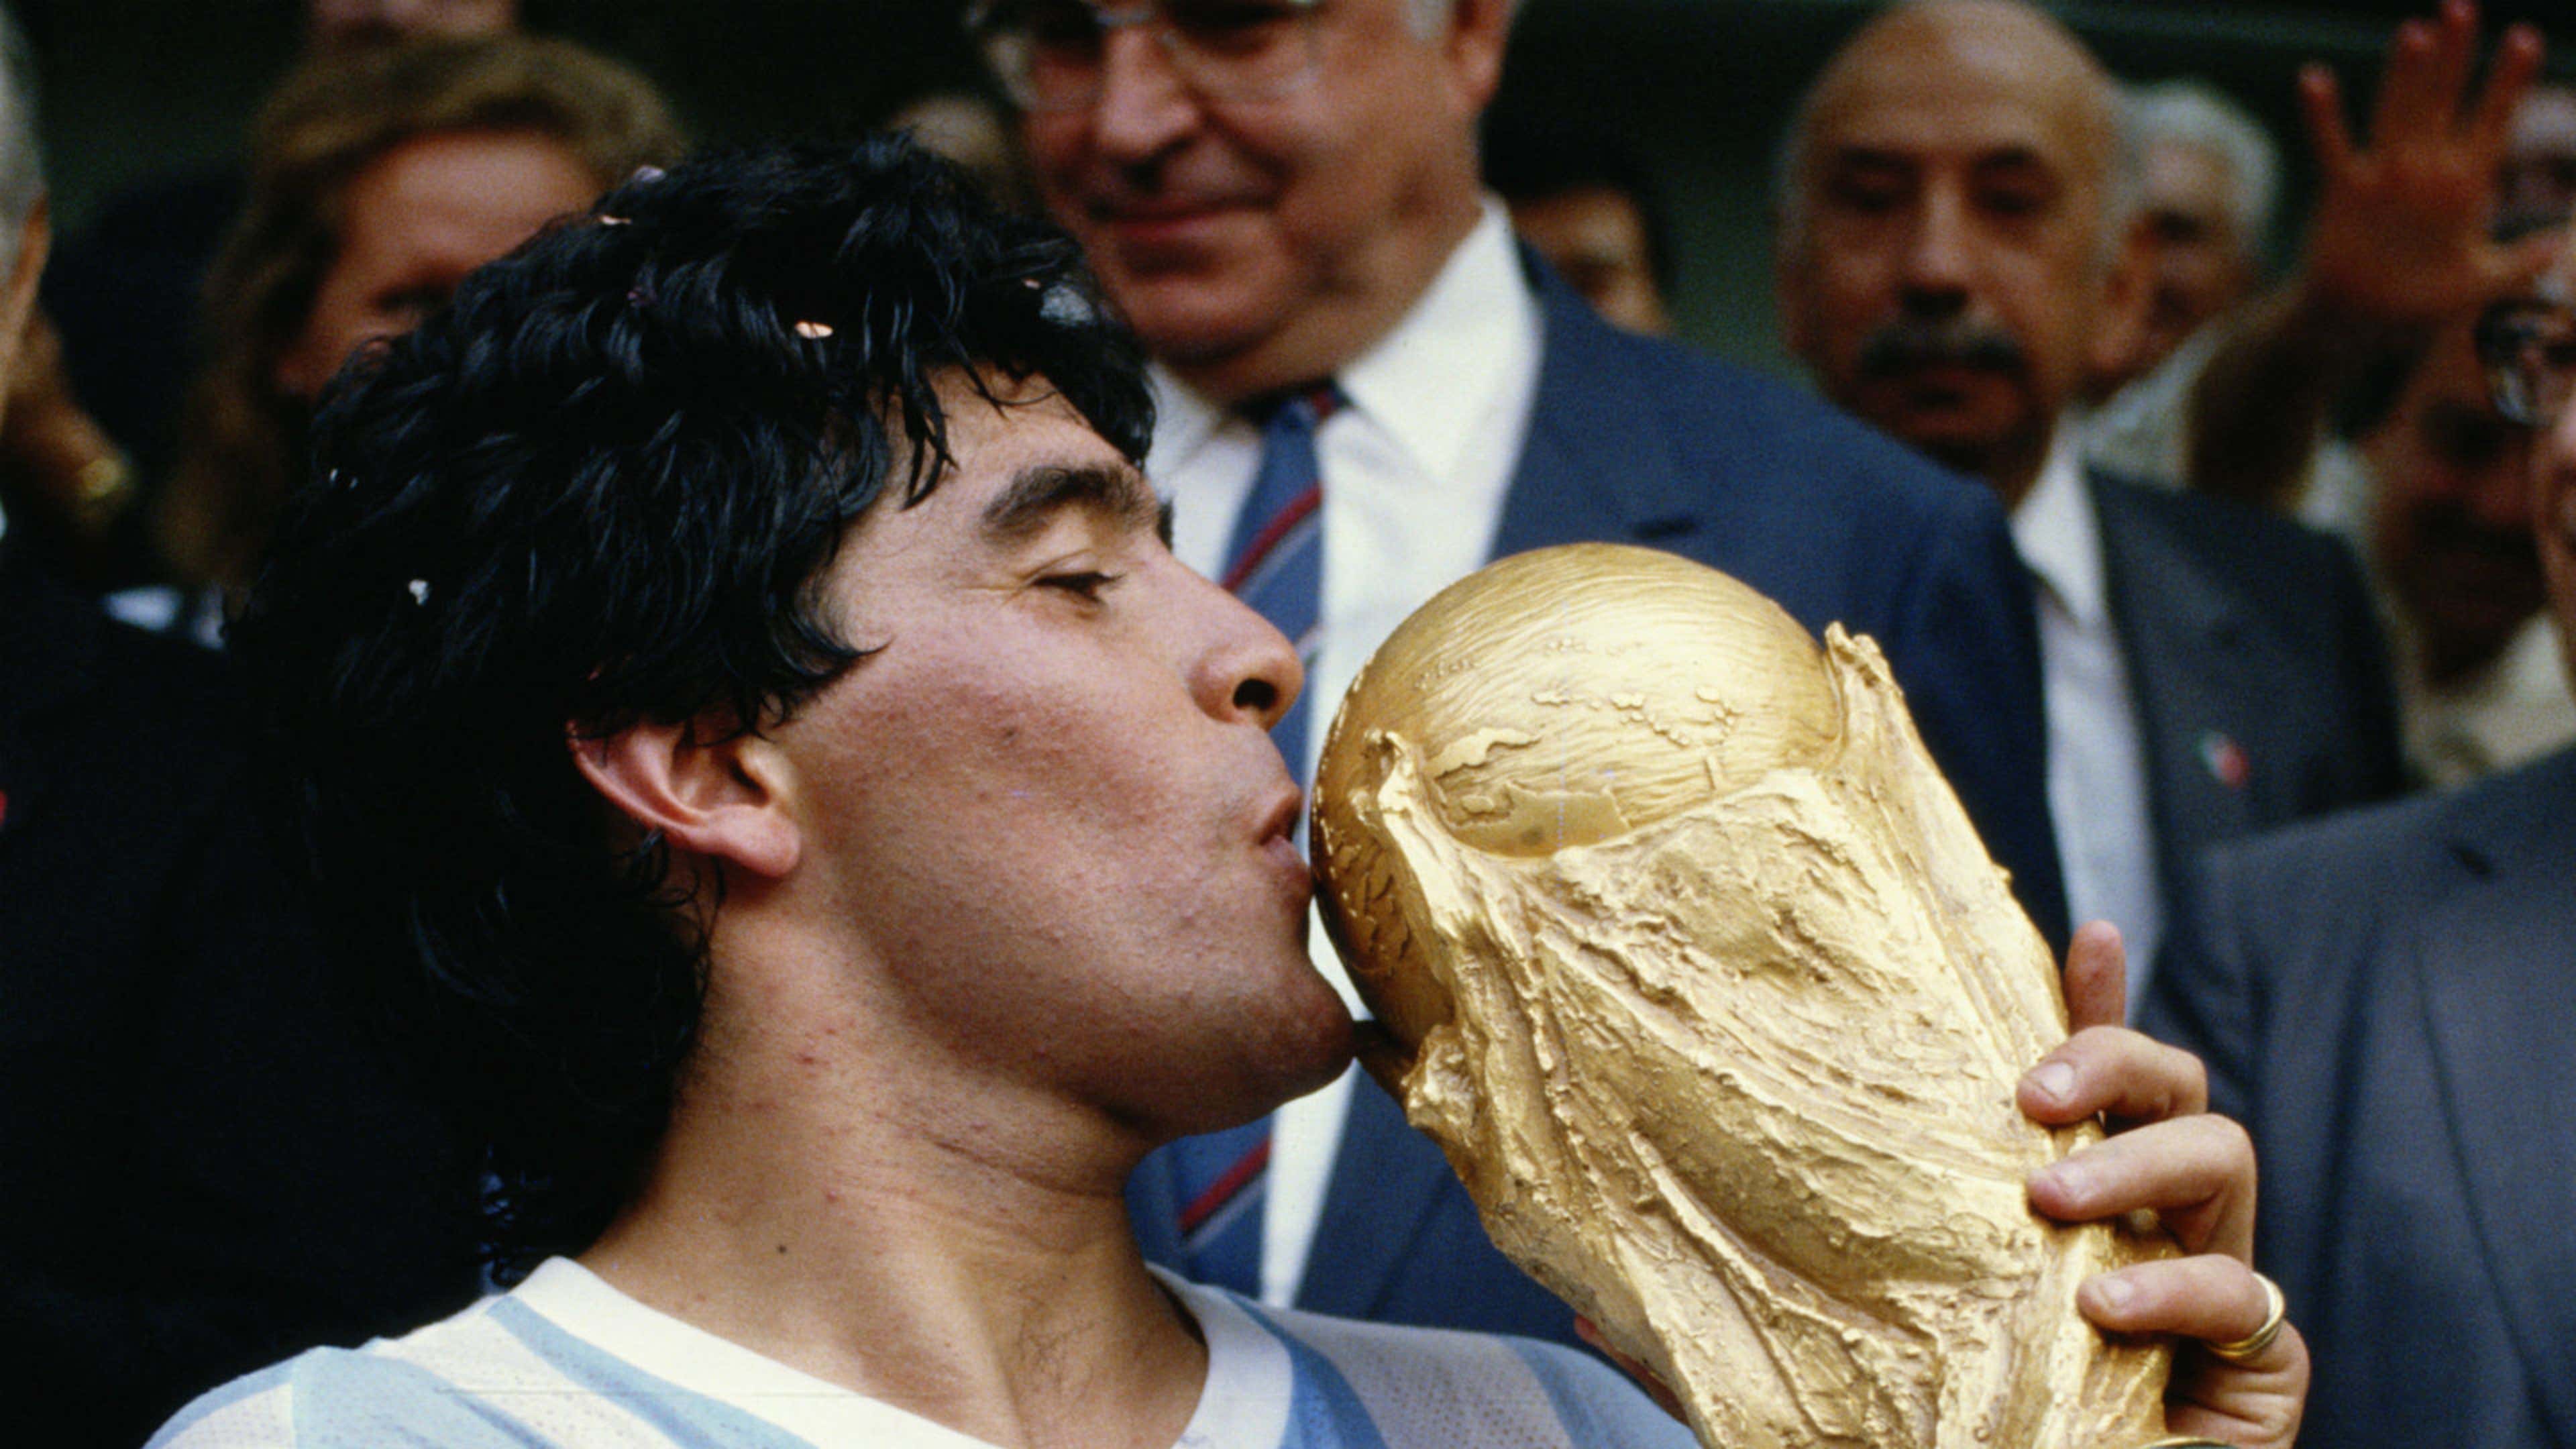 World Cup Winners: 13 MLS players who lifted the ultimate prize